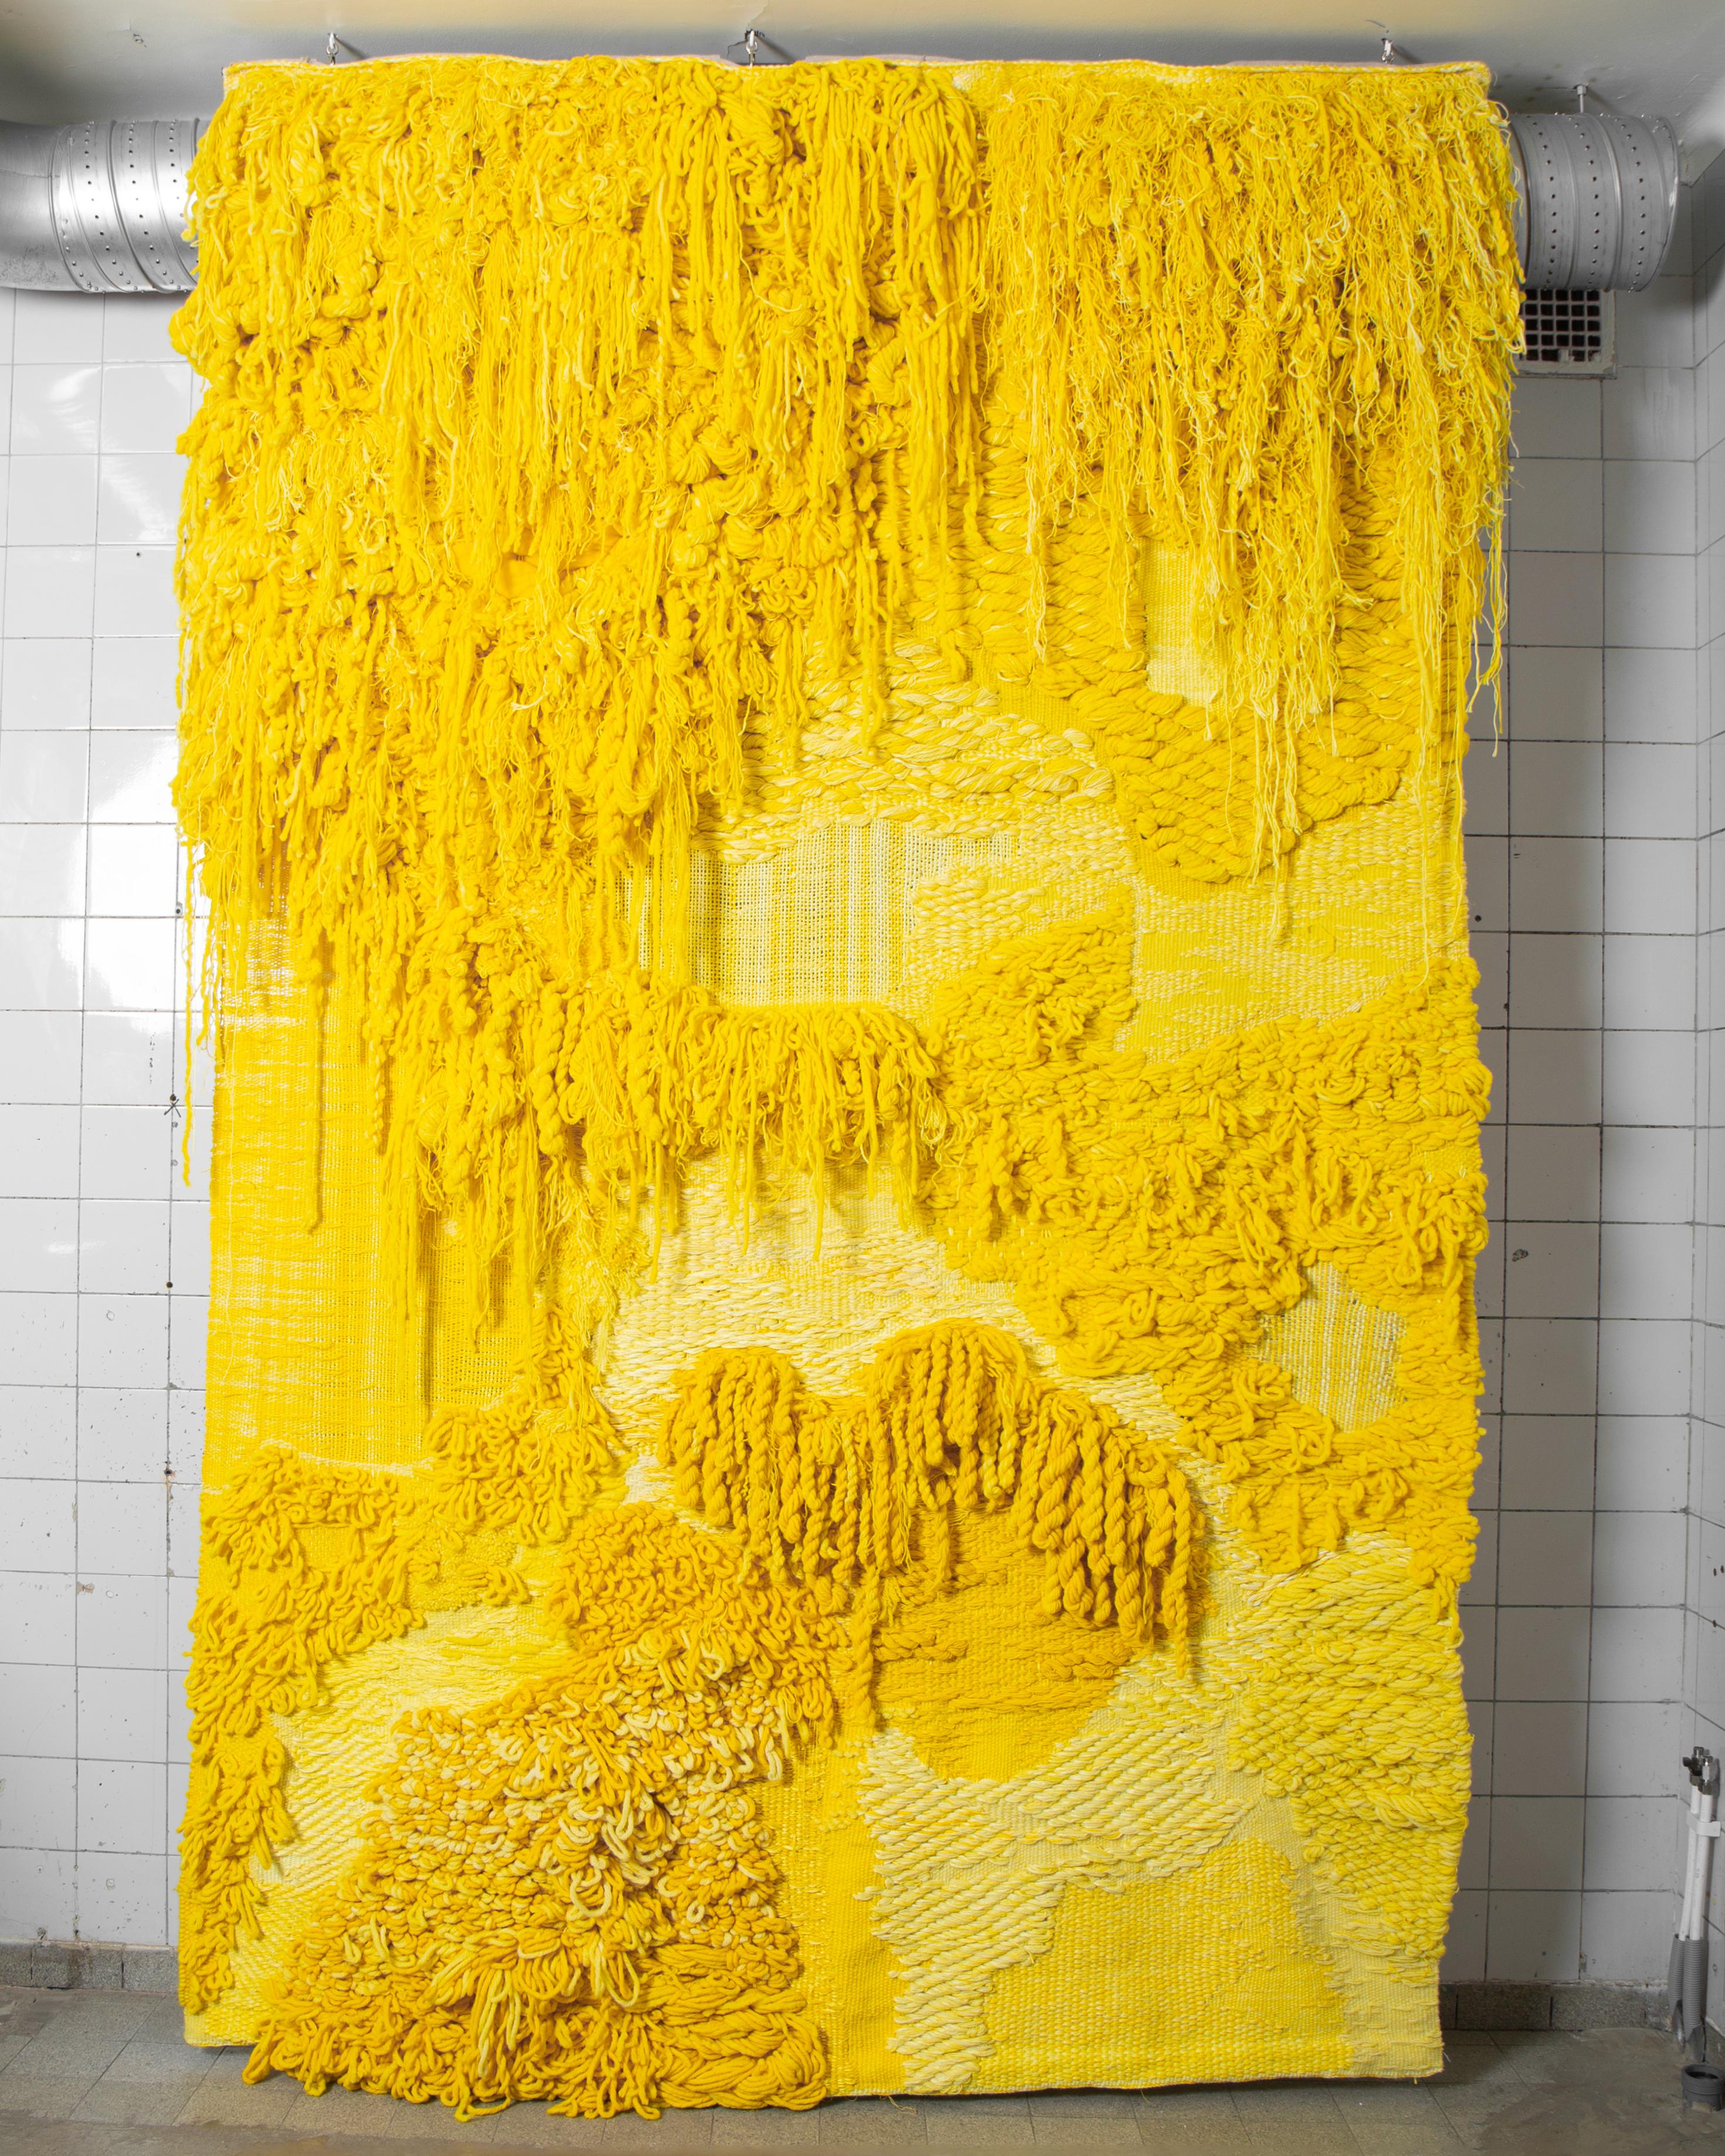 Title: YELLOW III

This handwoven tapestry is complex, tactile and rich in color. The composition is made using various techniques and materials such as dyed linen, wool and artificial hair. 

Born in Skara, Sweden, 1990, Beckman is considered to be